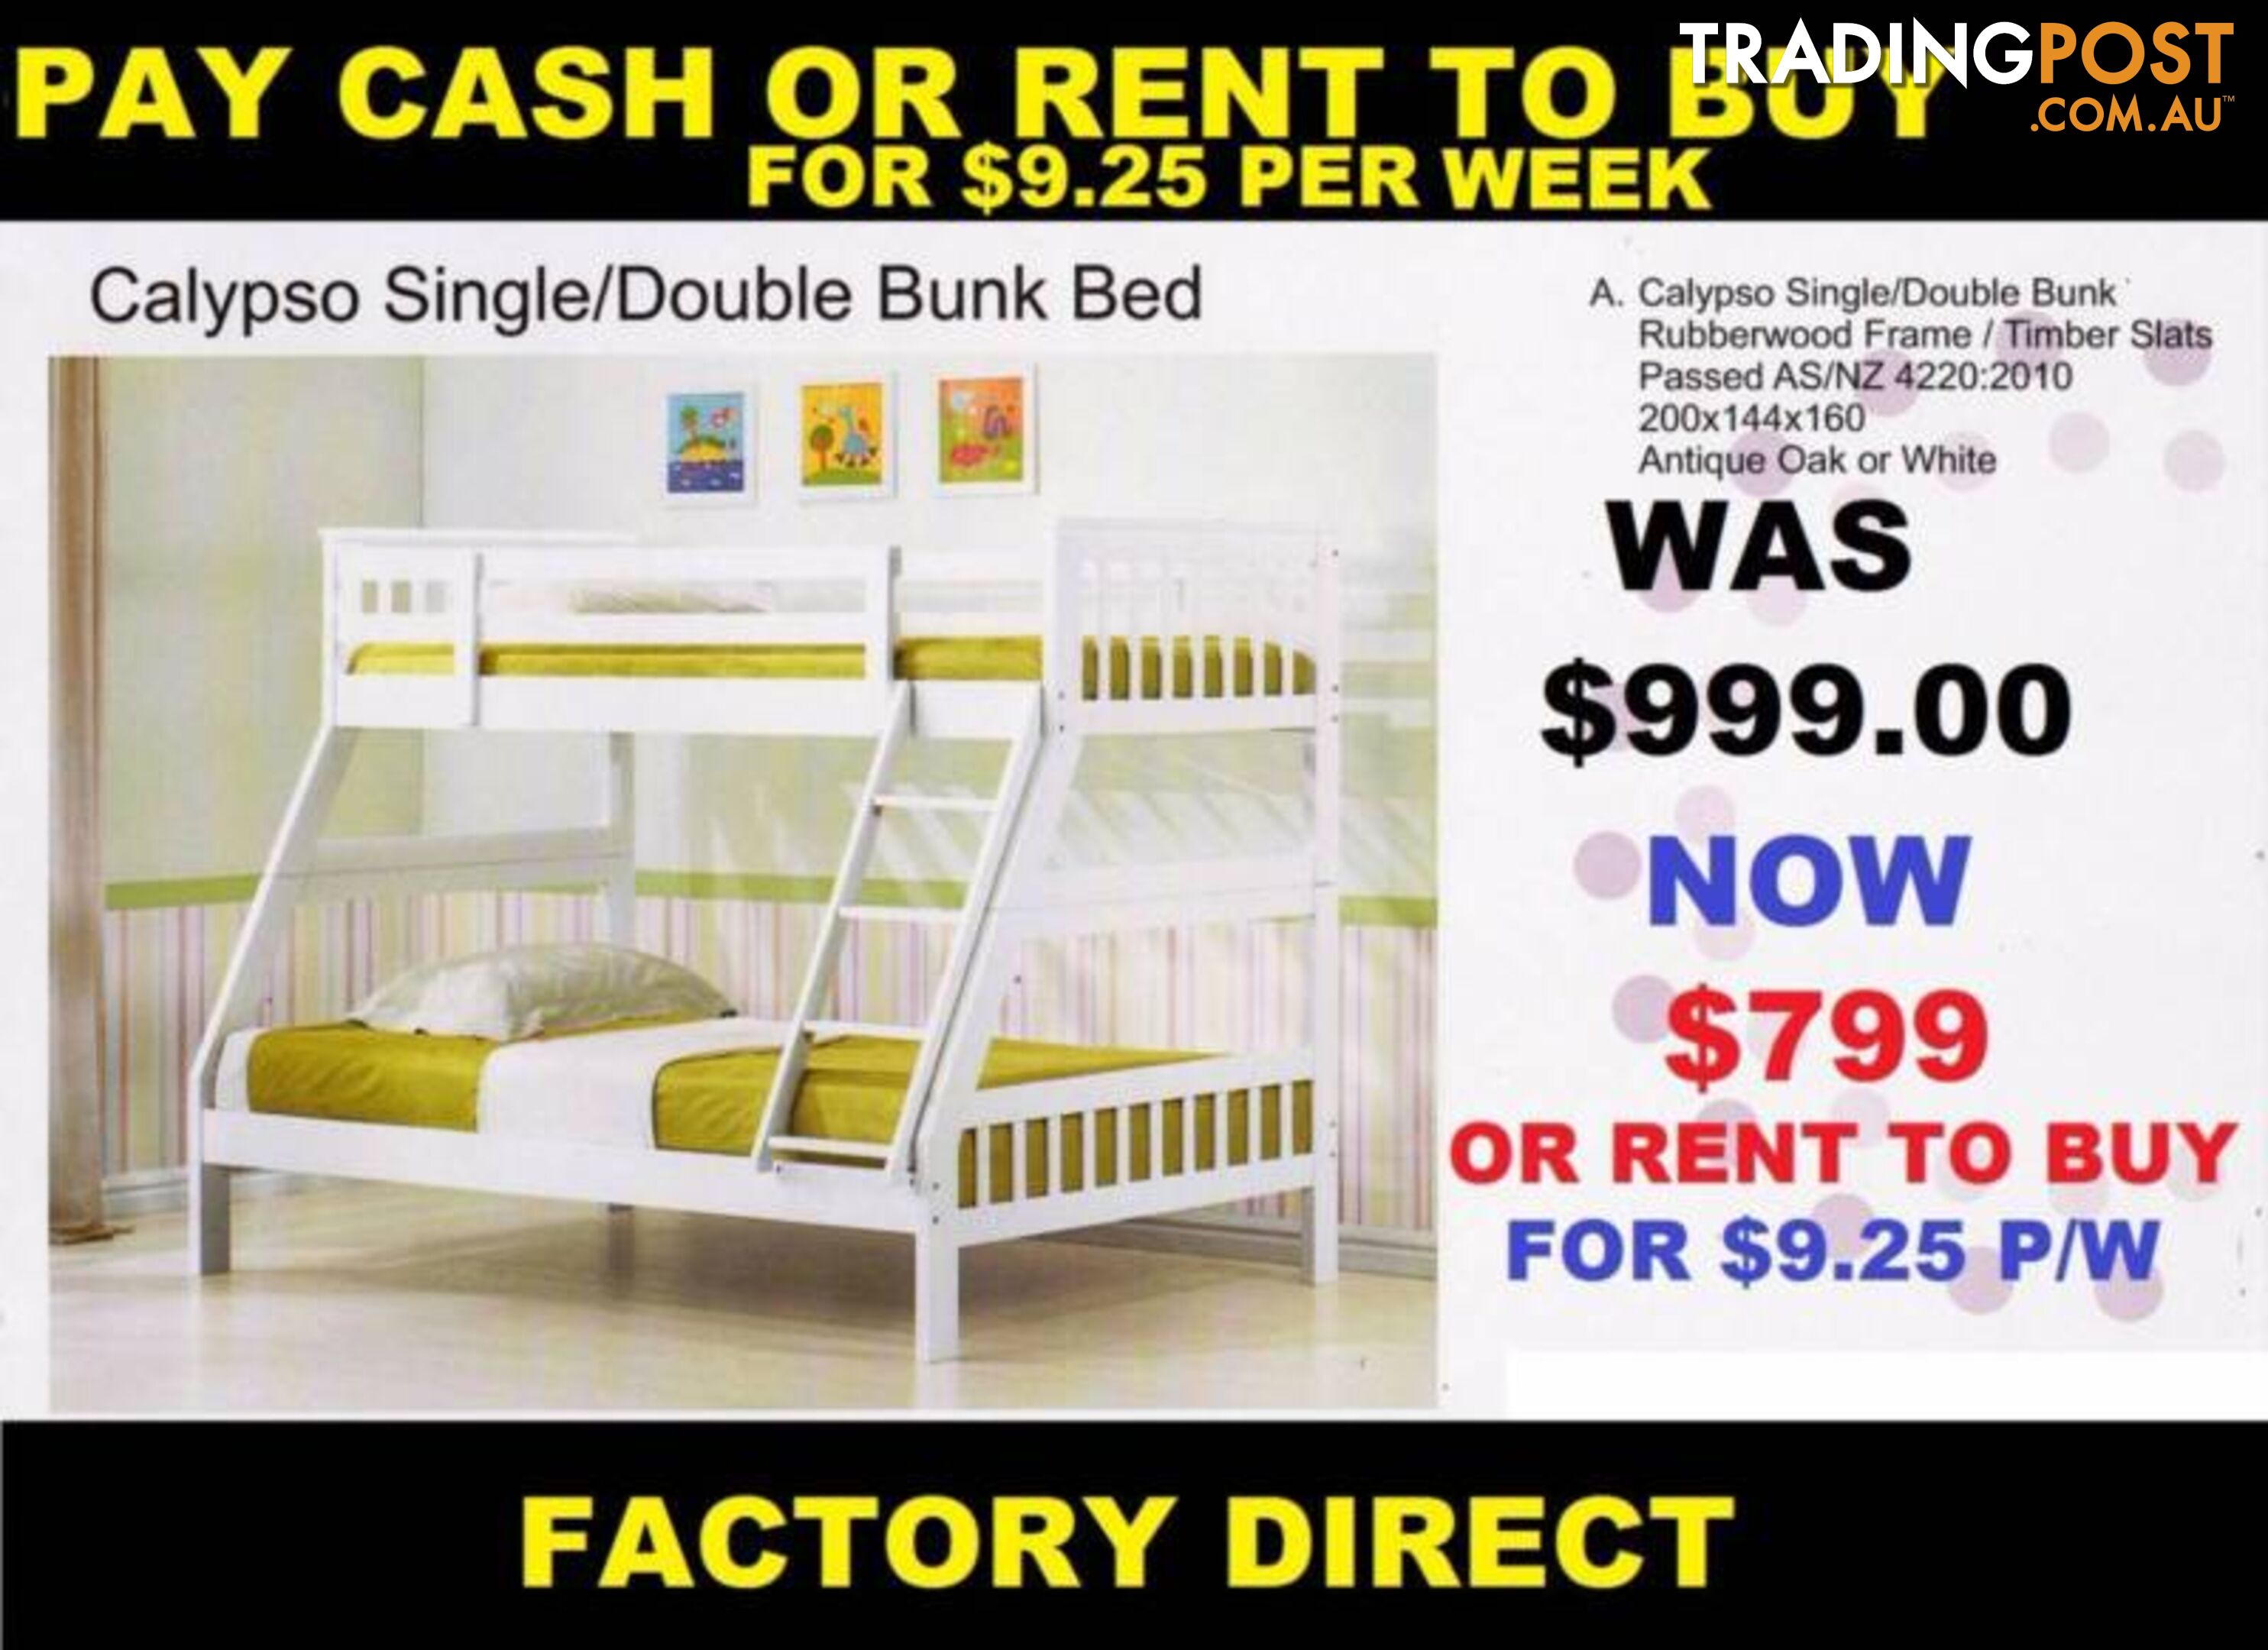 NEW BUNKS Single Bottom And Double Top. RENT KEEP $8.95 PW